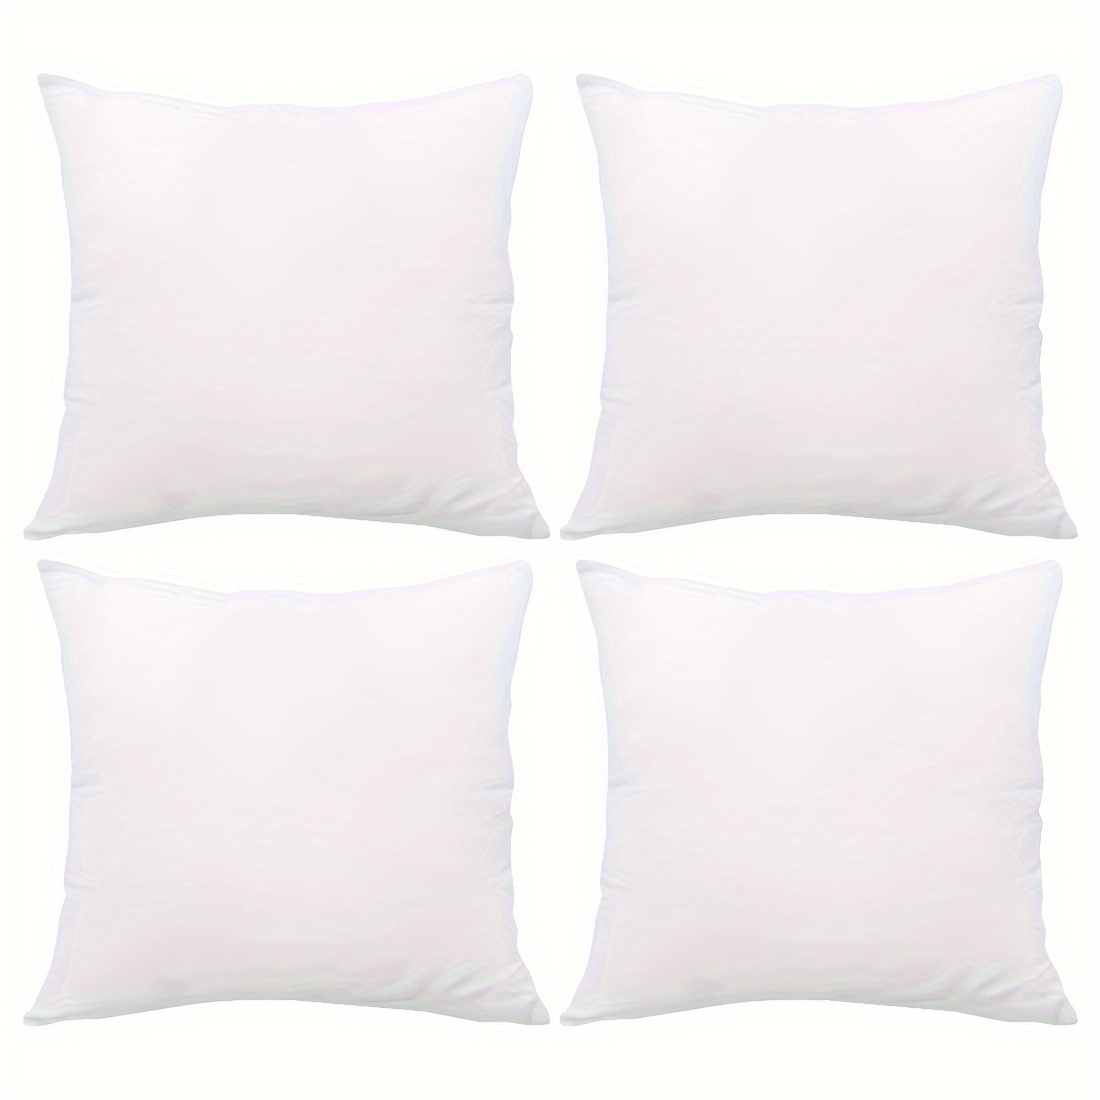 

4pcs, White Solid Color Throw Pillow Covers (17.7"x17.7"), Soft Peach Skin Velvet, Contemporary Style, Cushion Cases For Living Room, Bedroom, Sofa Decor